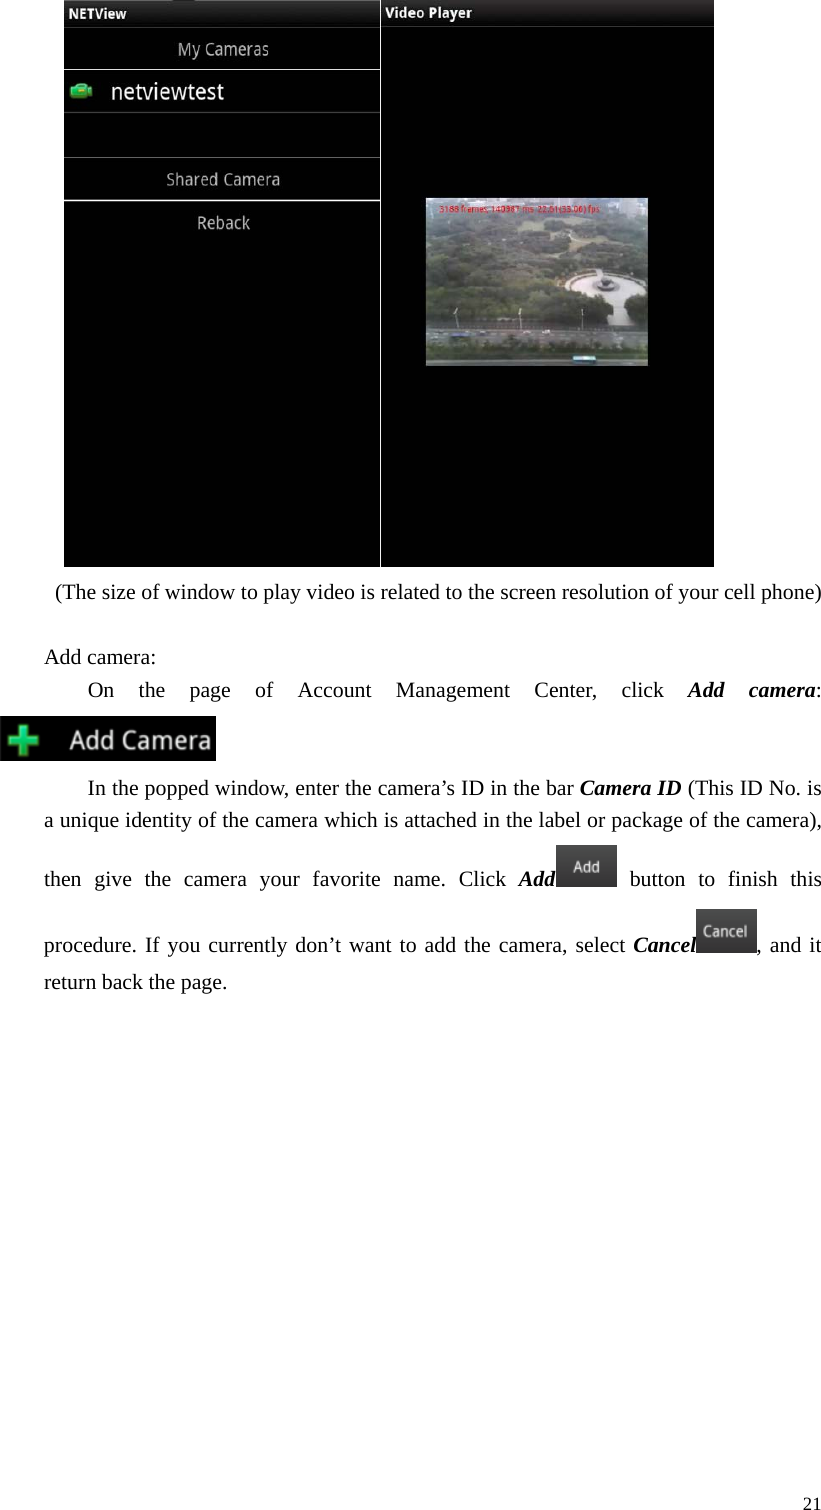  21   (The size of window to play video is related to the screen resolution of your cell phone)  Add camera: On the page of Account Management Center, click Add camera:  In the popped window, enter the camera’s ID in the bar Camera ID (This ID No. is a unique identity of the camera which is attached in the label or package of the camera), then give the camera your favorite name. Click Add  button to finish this procedure. If you currently don’t want to add the camera, select Cancel , and it return back the page.   